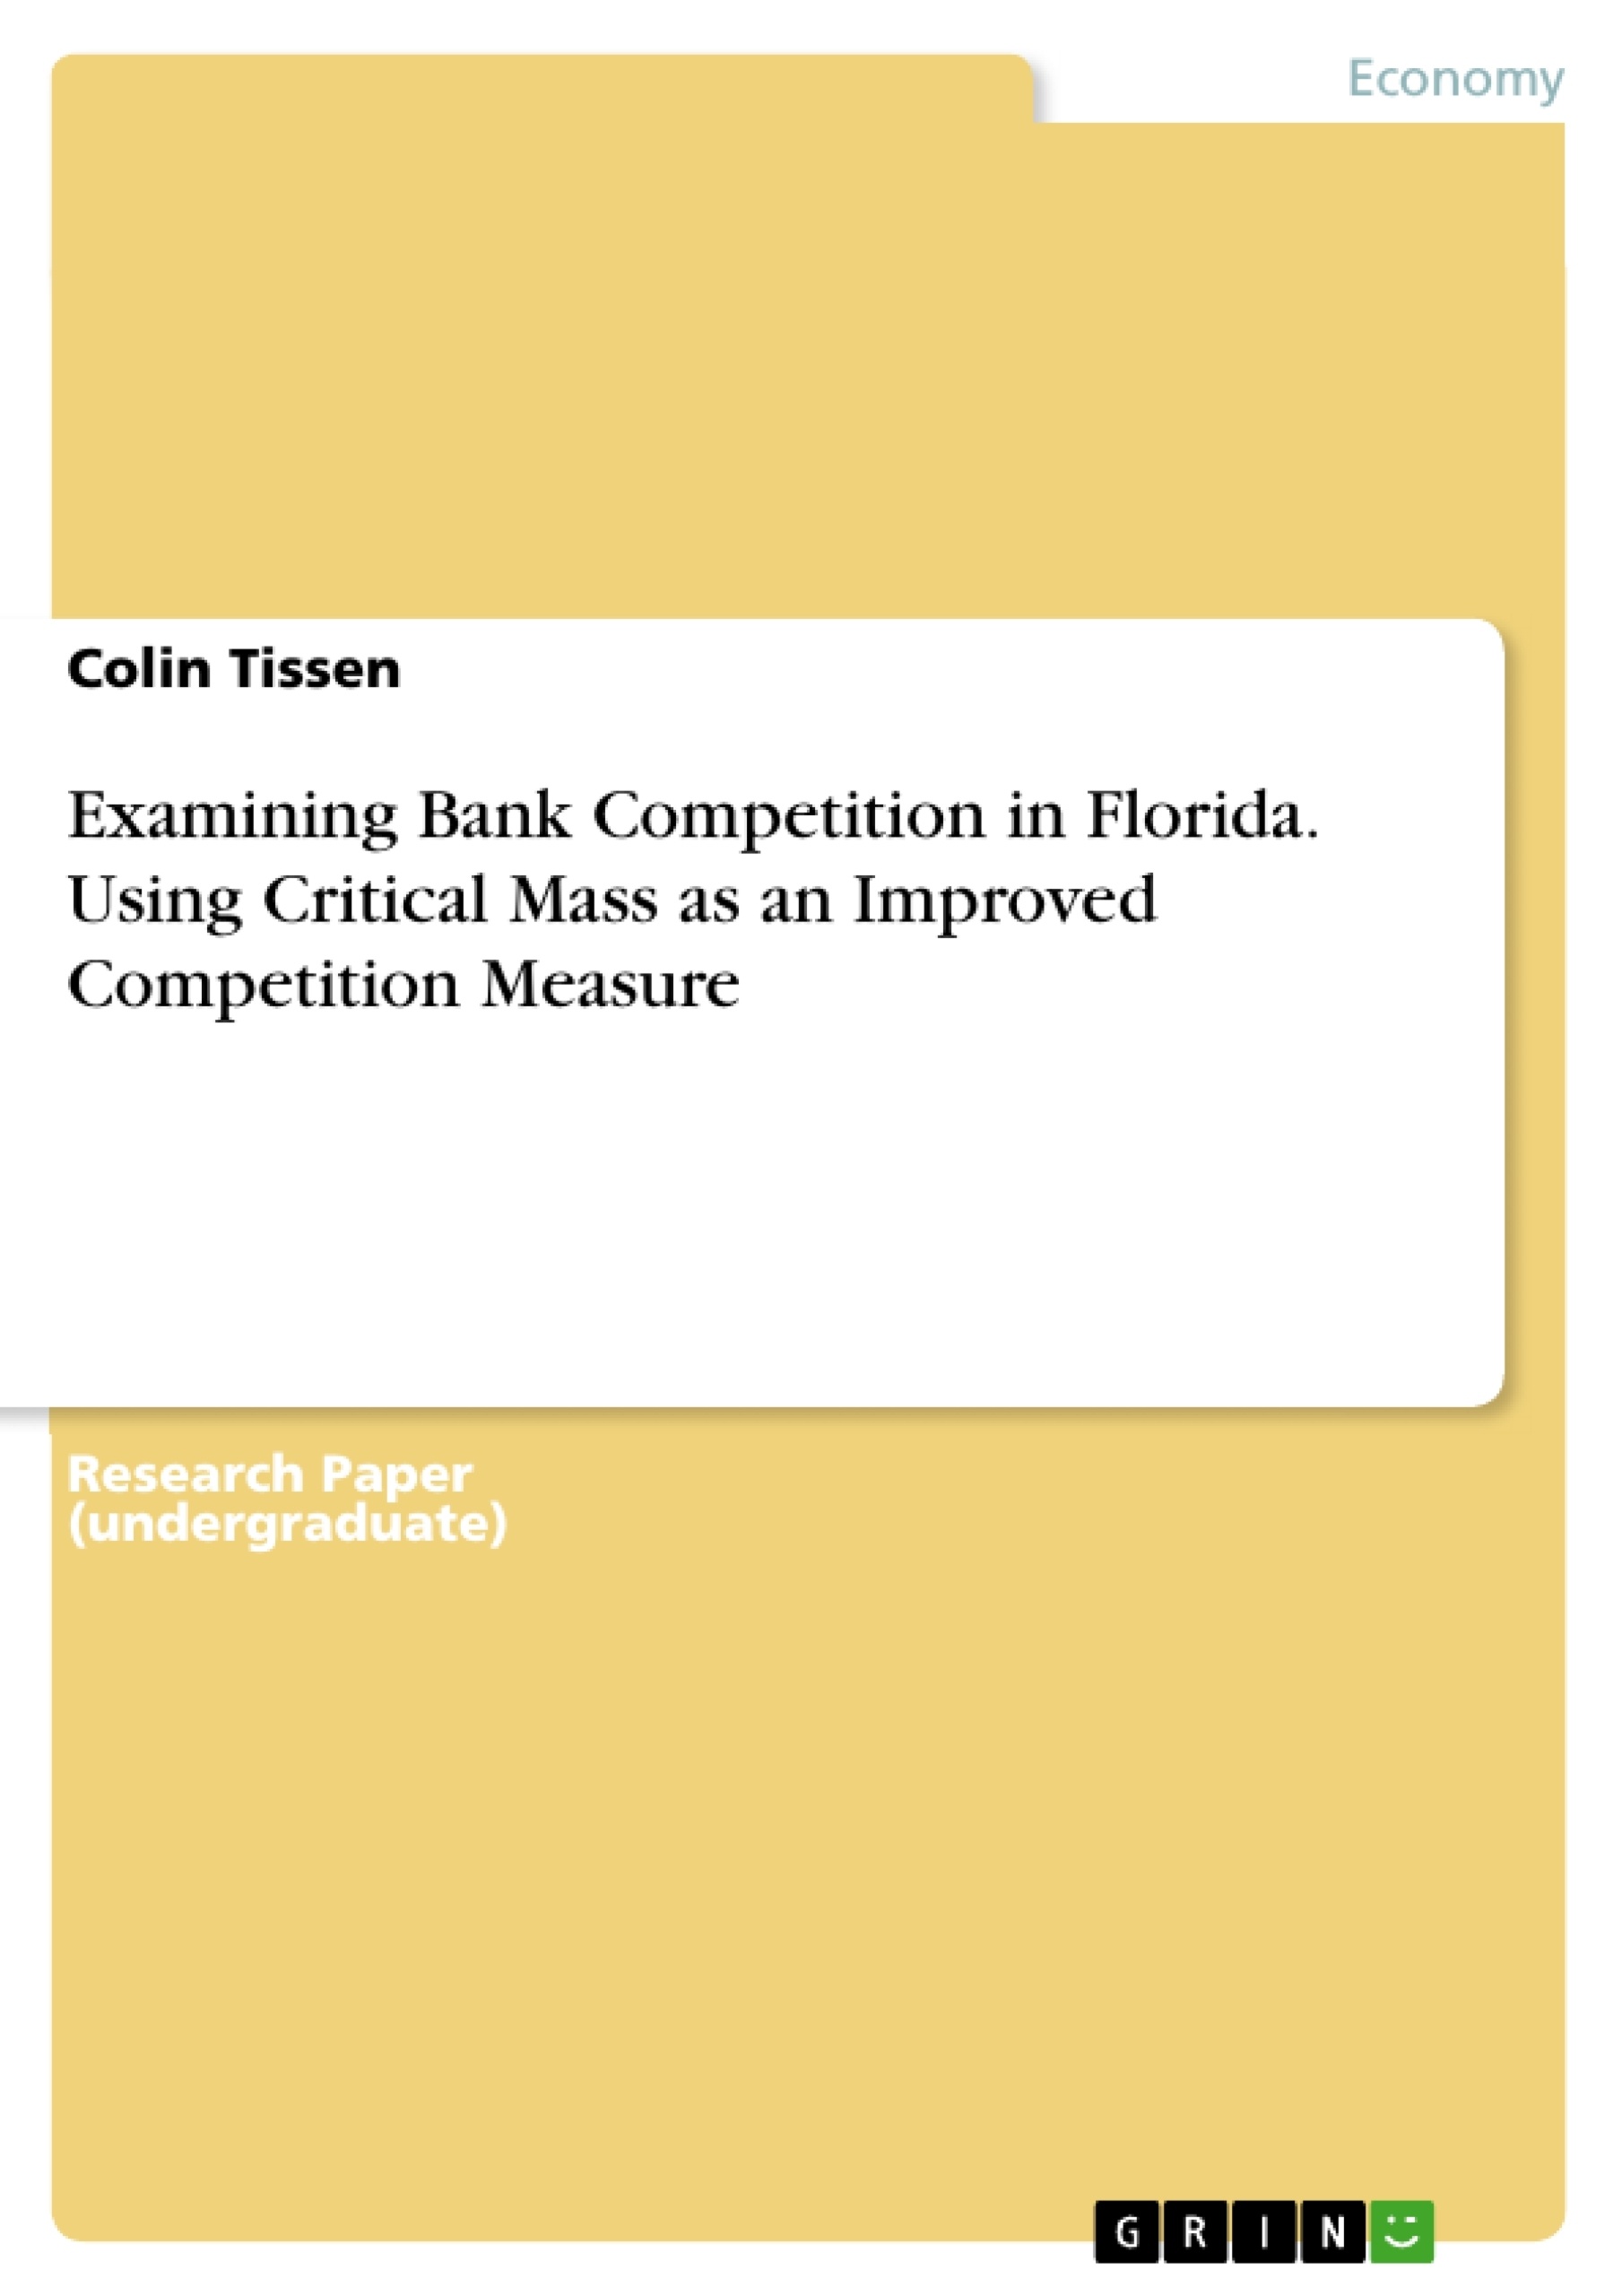 Title: Examining Bank Competition in Florida. Using Critical Mass as an Improved Competition Measure